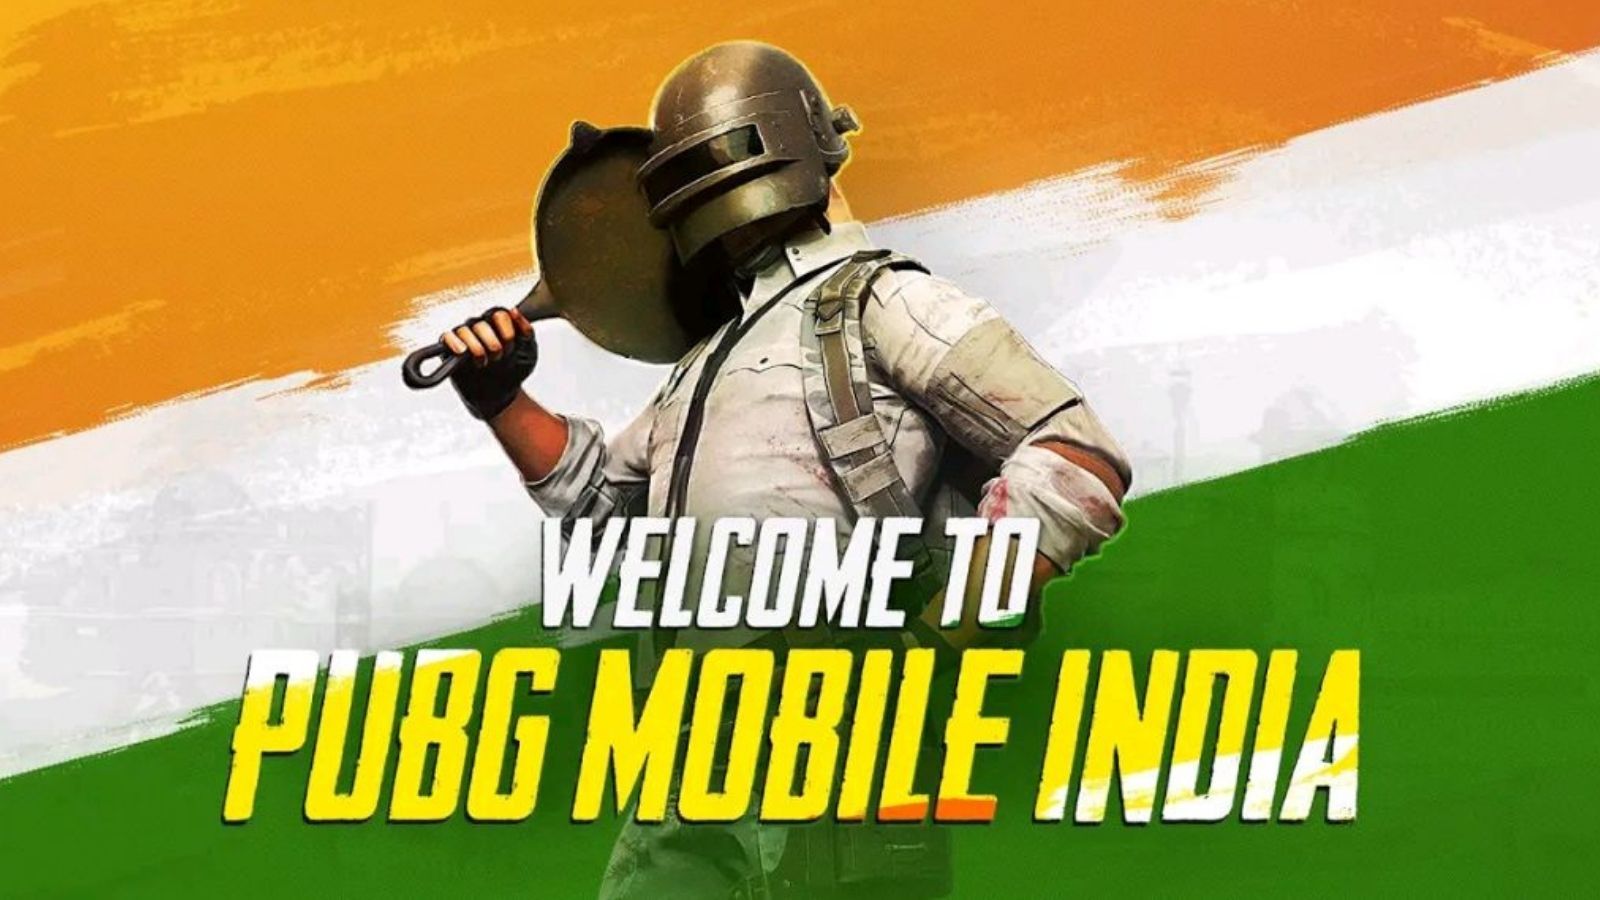 Battlegrounds Mobile India Alleged Listing Spotted on Play Store and it is  Plastered With PUBG Mobile India Moniker - MySmartPrice